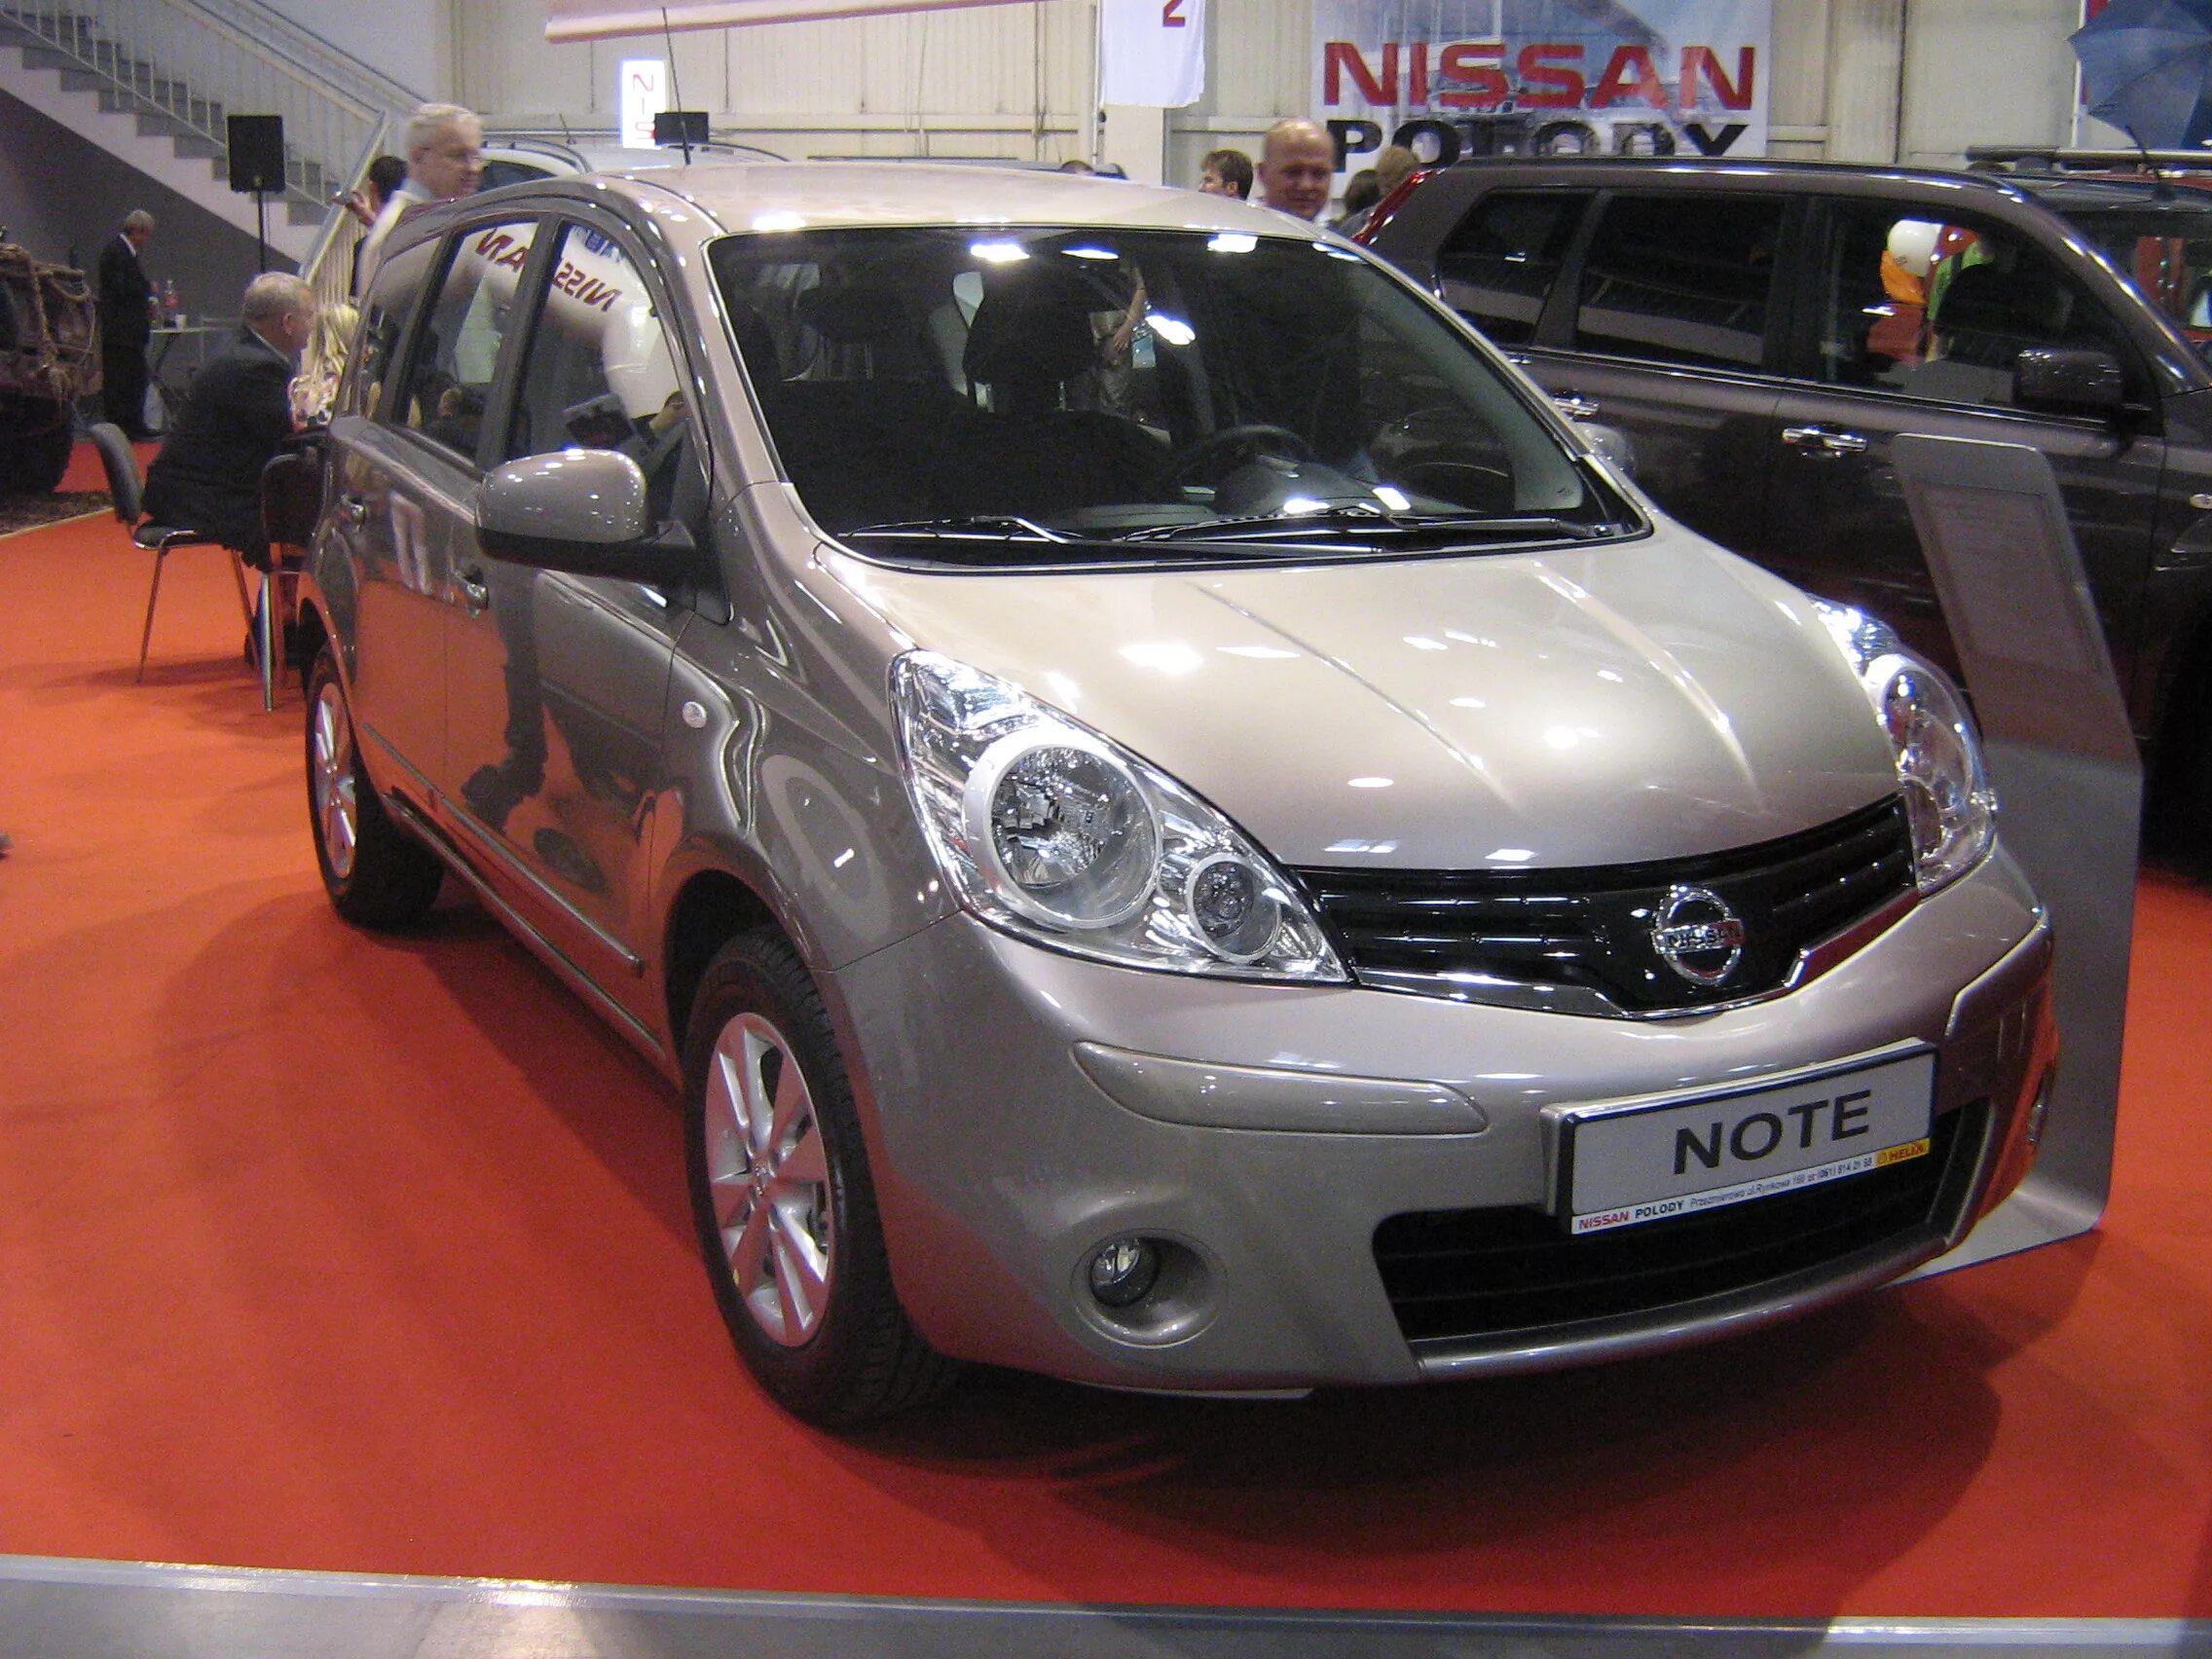 Nissan note e11. Nissan Note. Ниссан ноут 2009. Nissan Note 1.6, 2010. Nissan Note e11 2012.